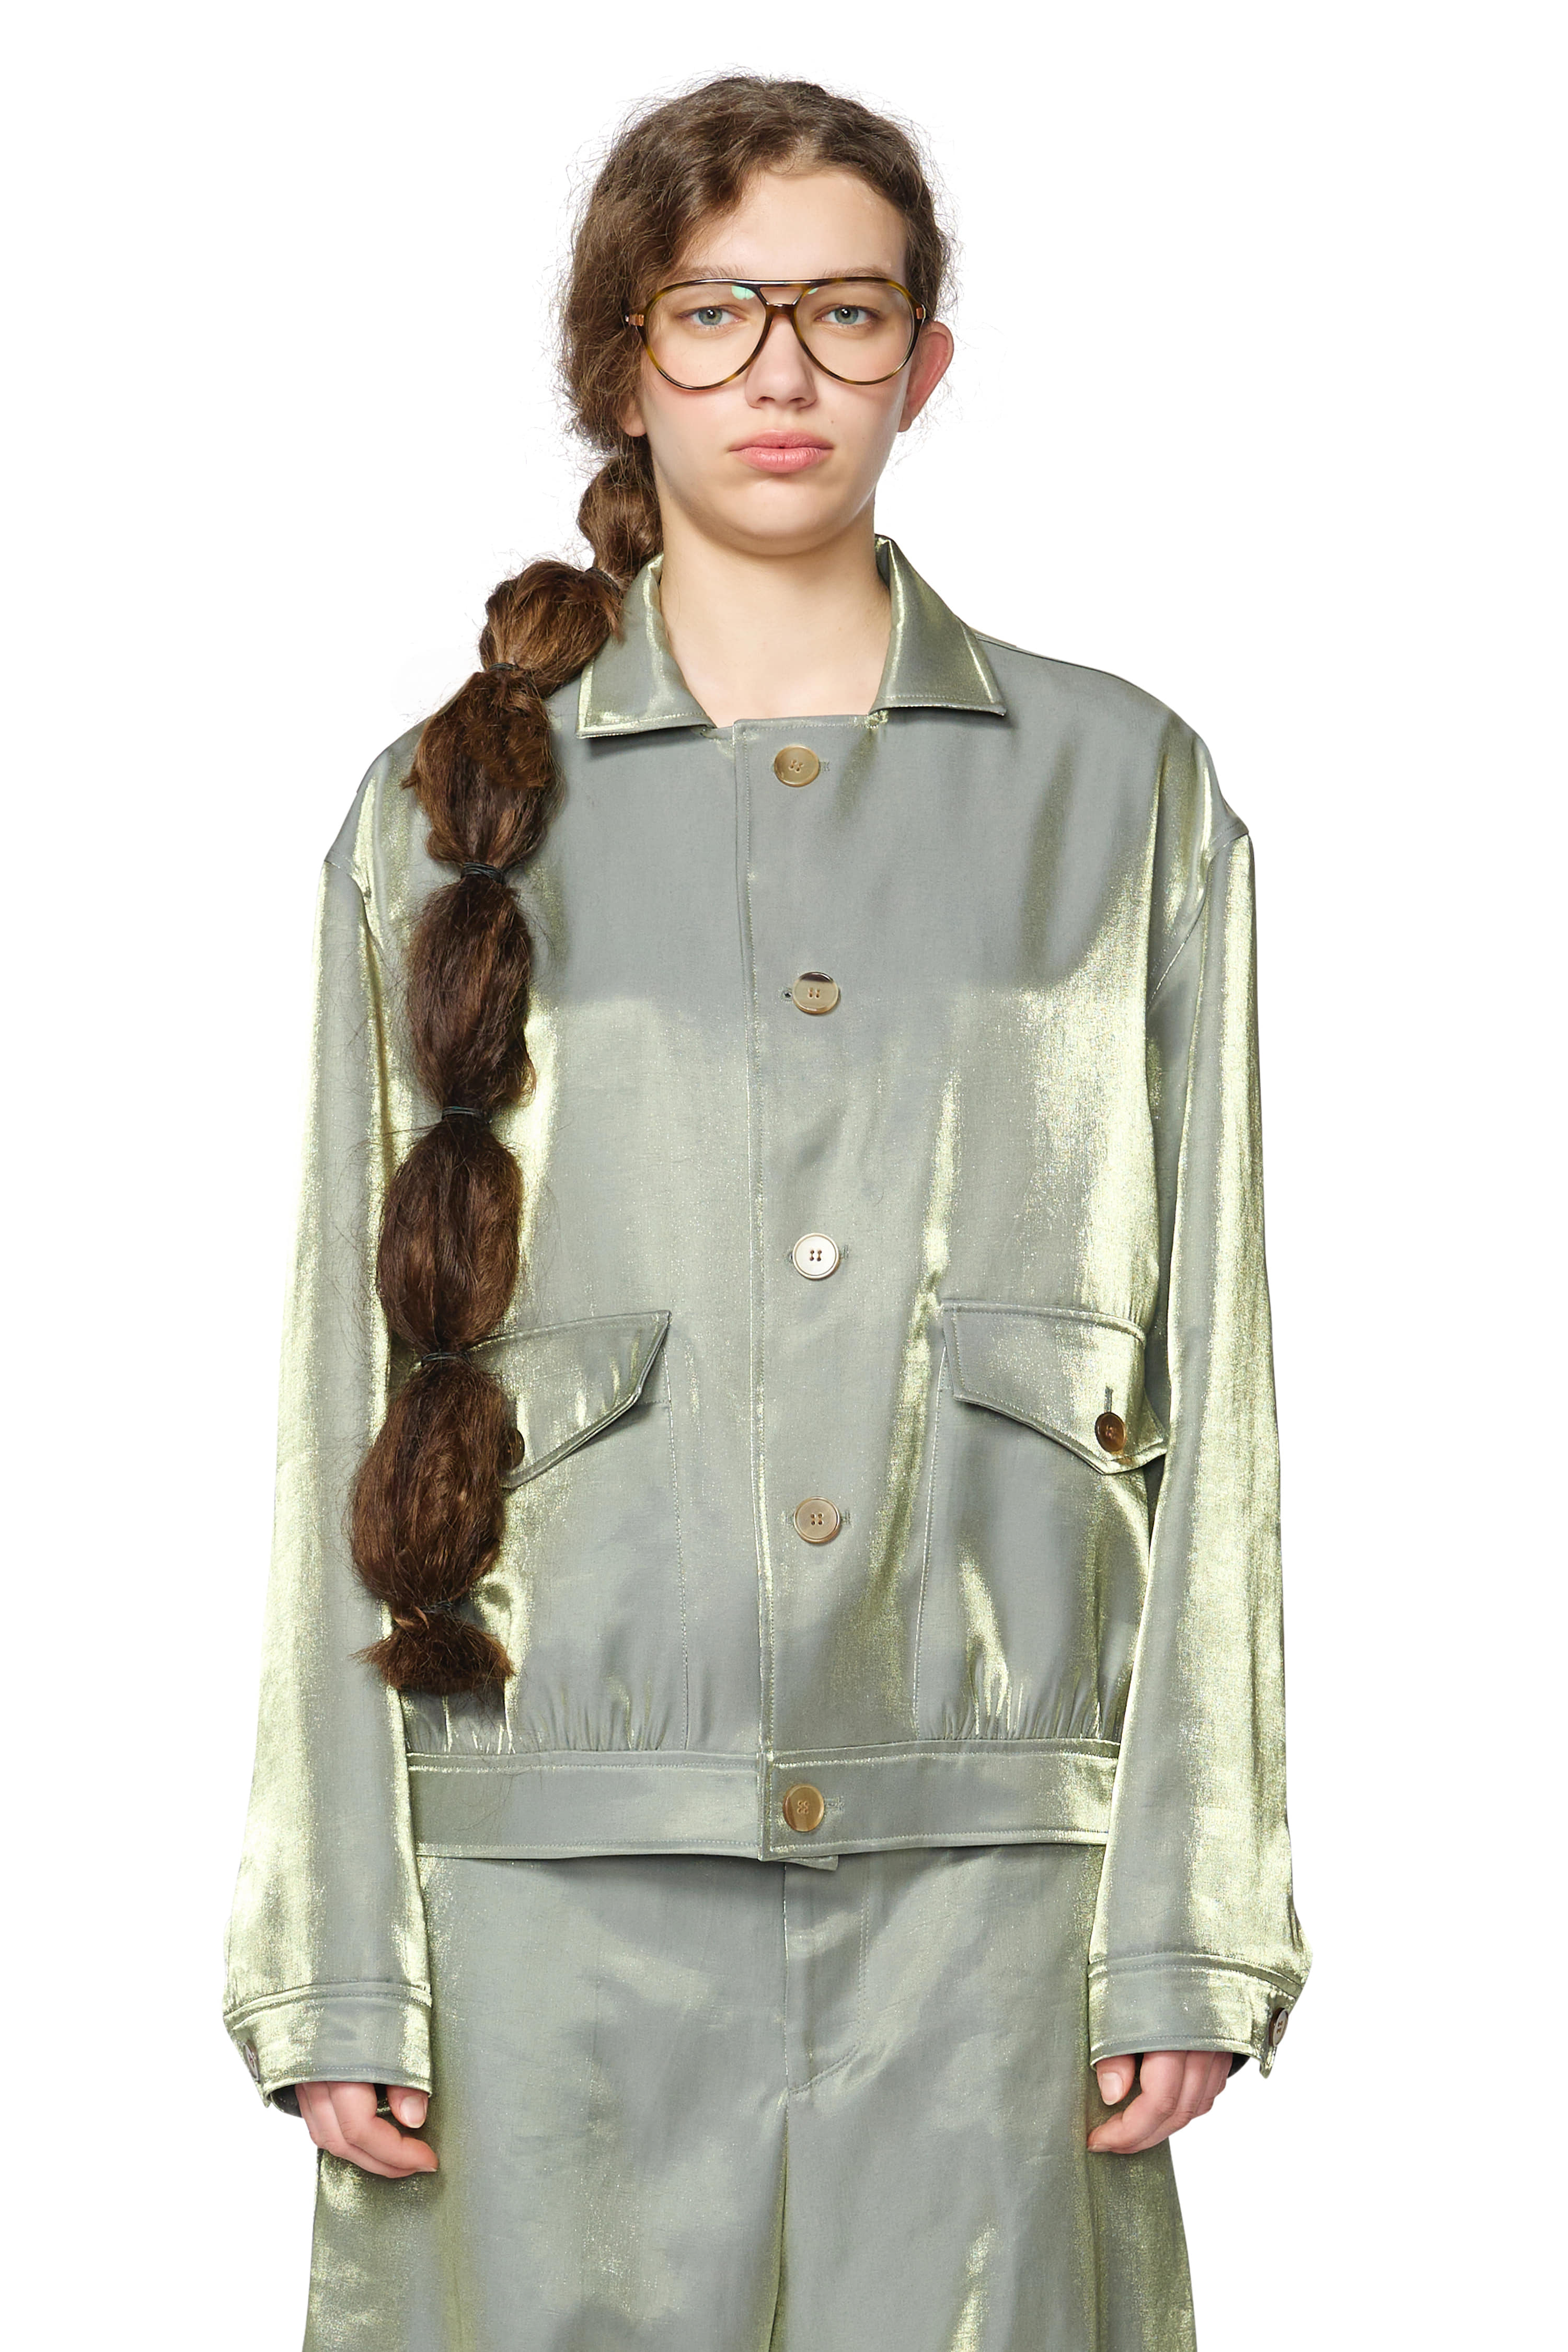 [ Delivery from 5/1 ] GLOSSY GREEN POCKET BLOUSON JACKET